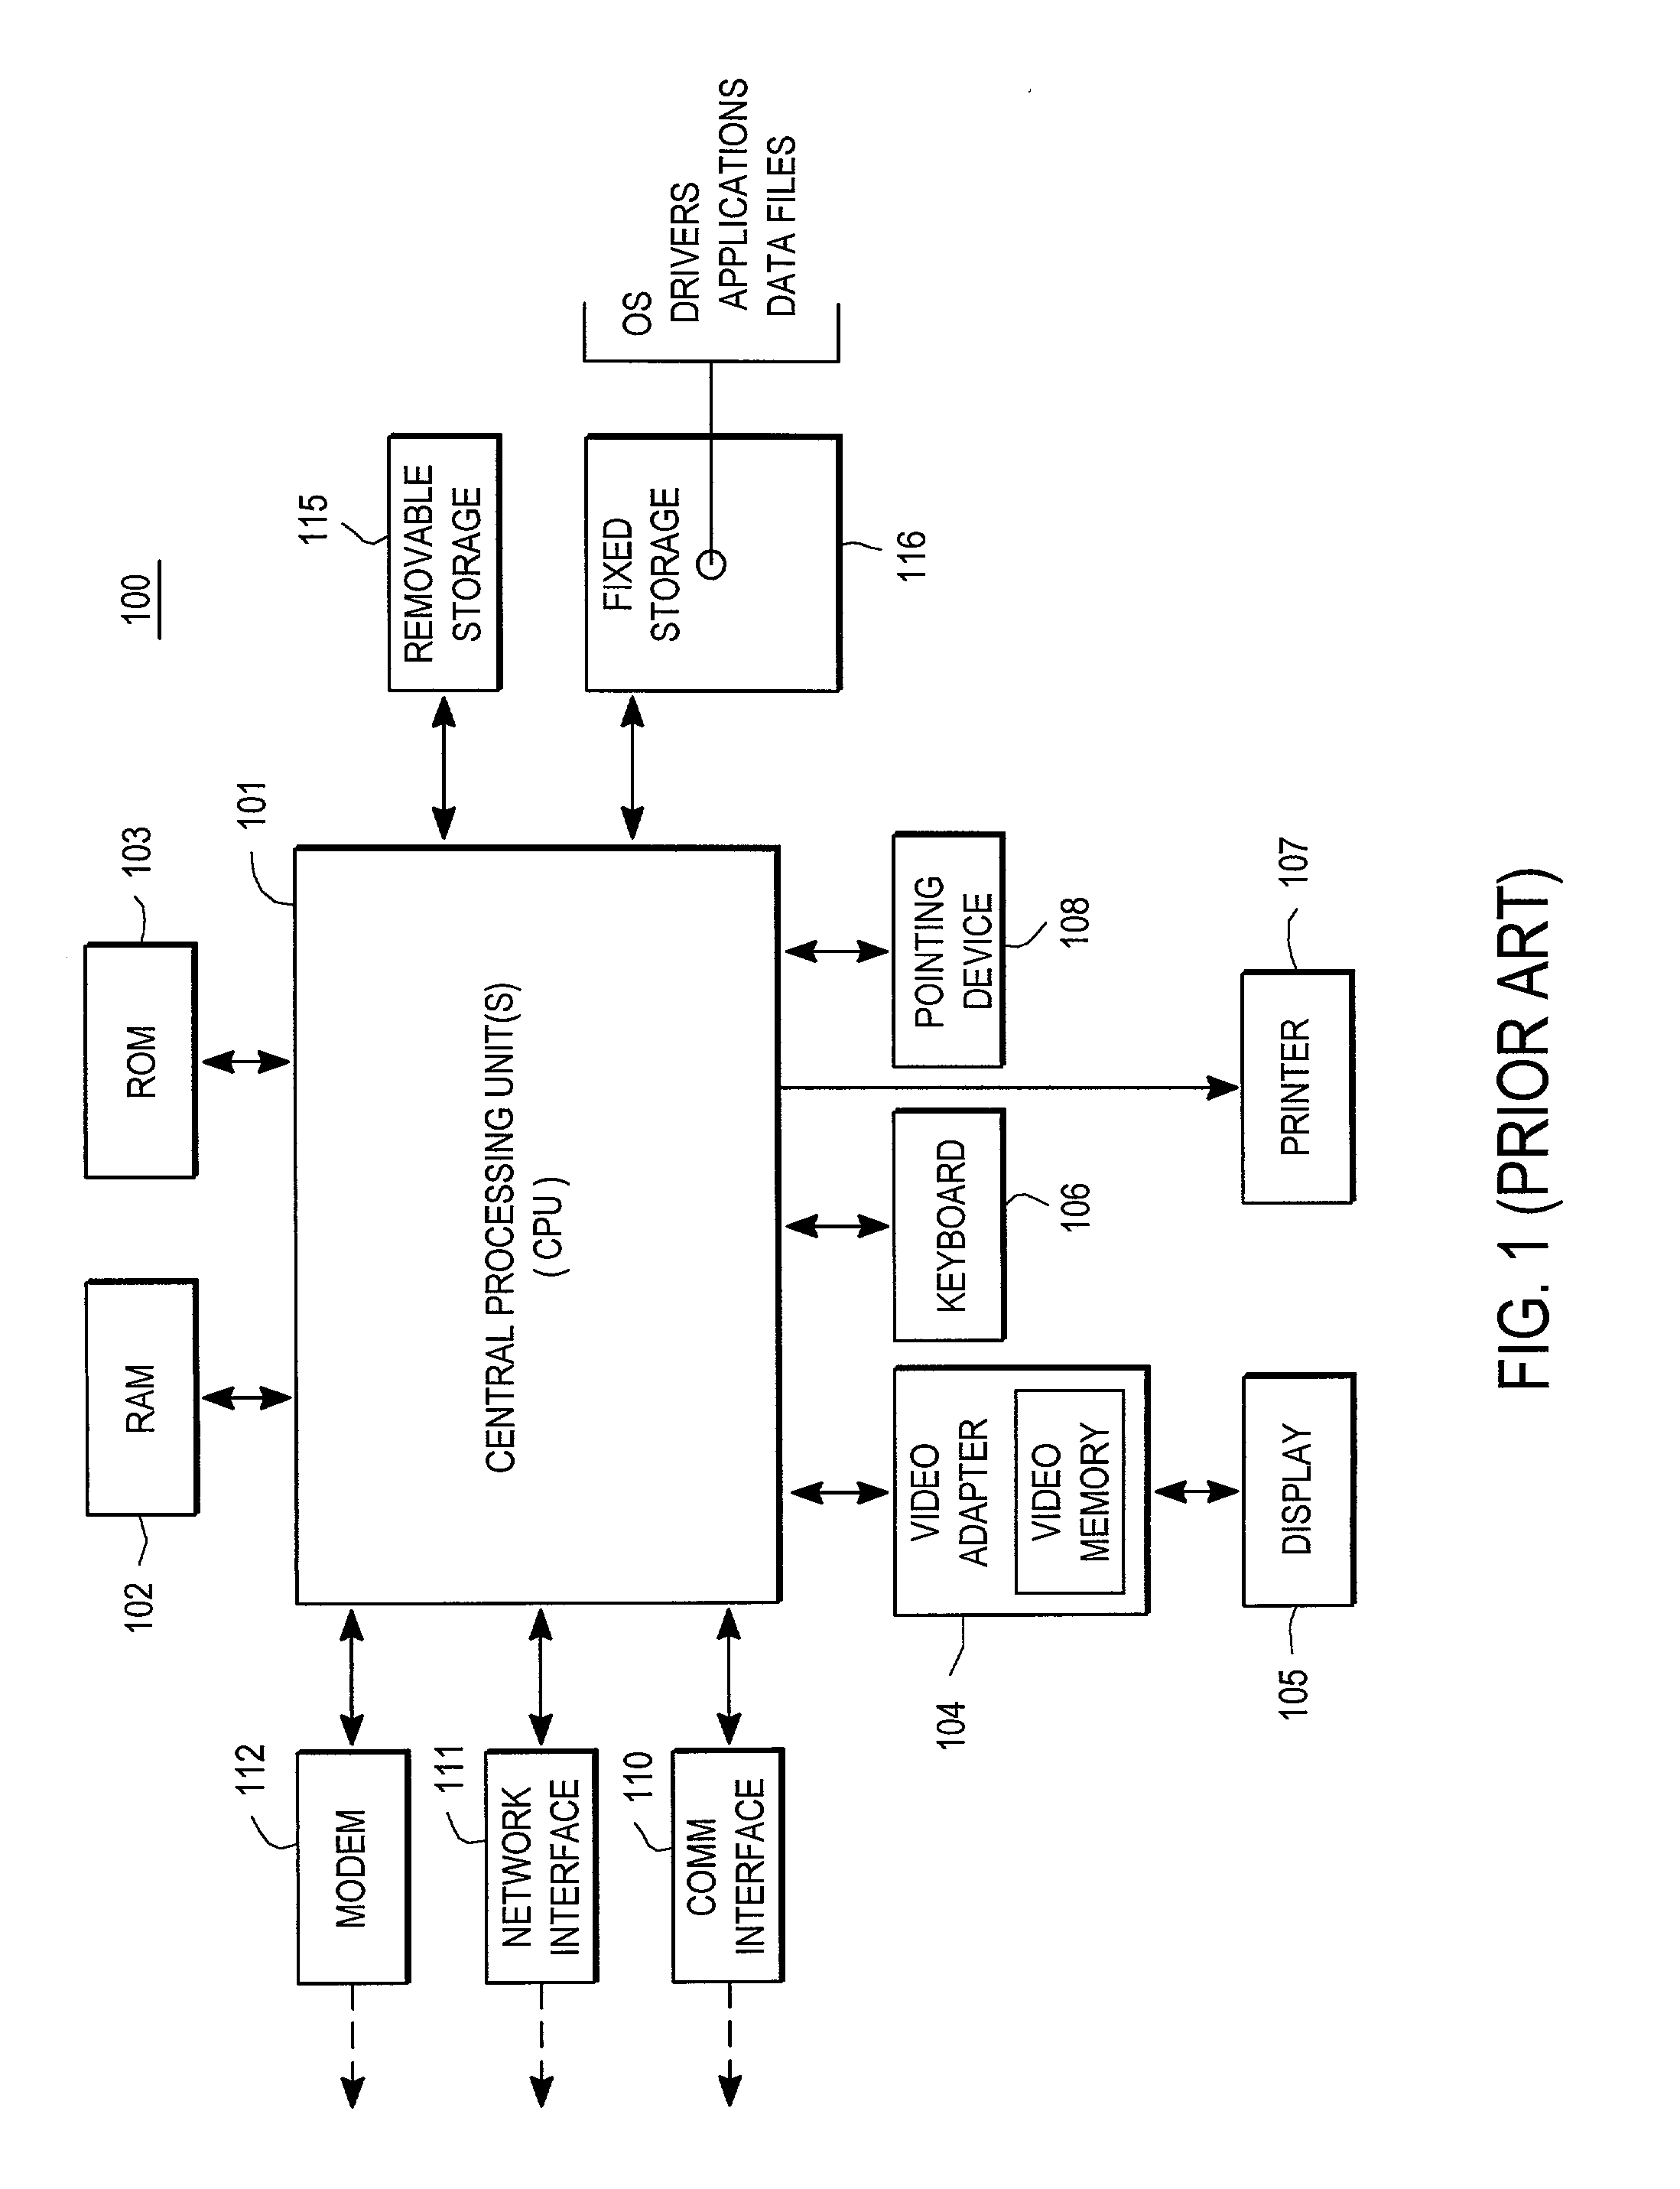 System and method for context-based spontaneous speech recognition